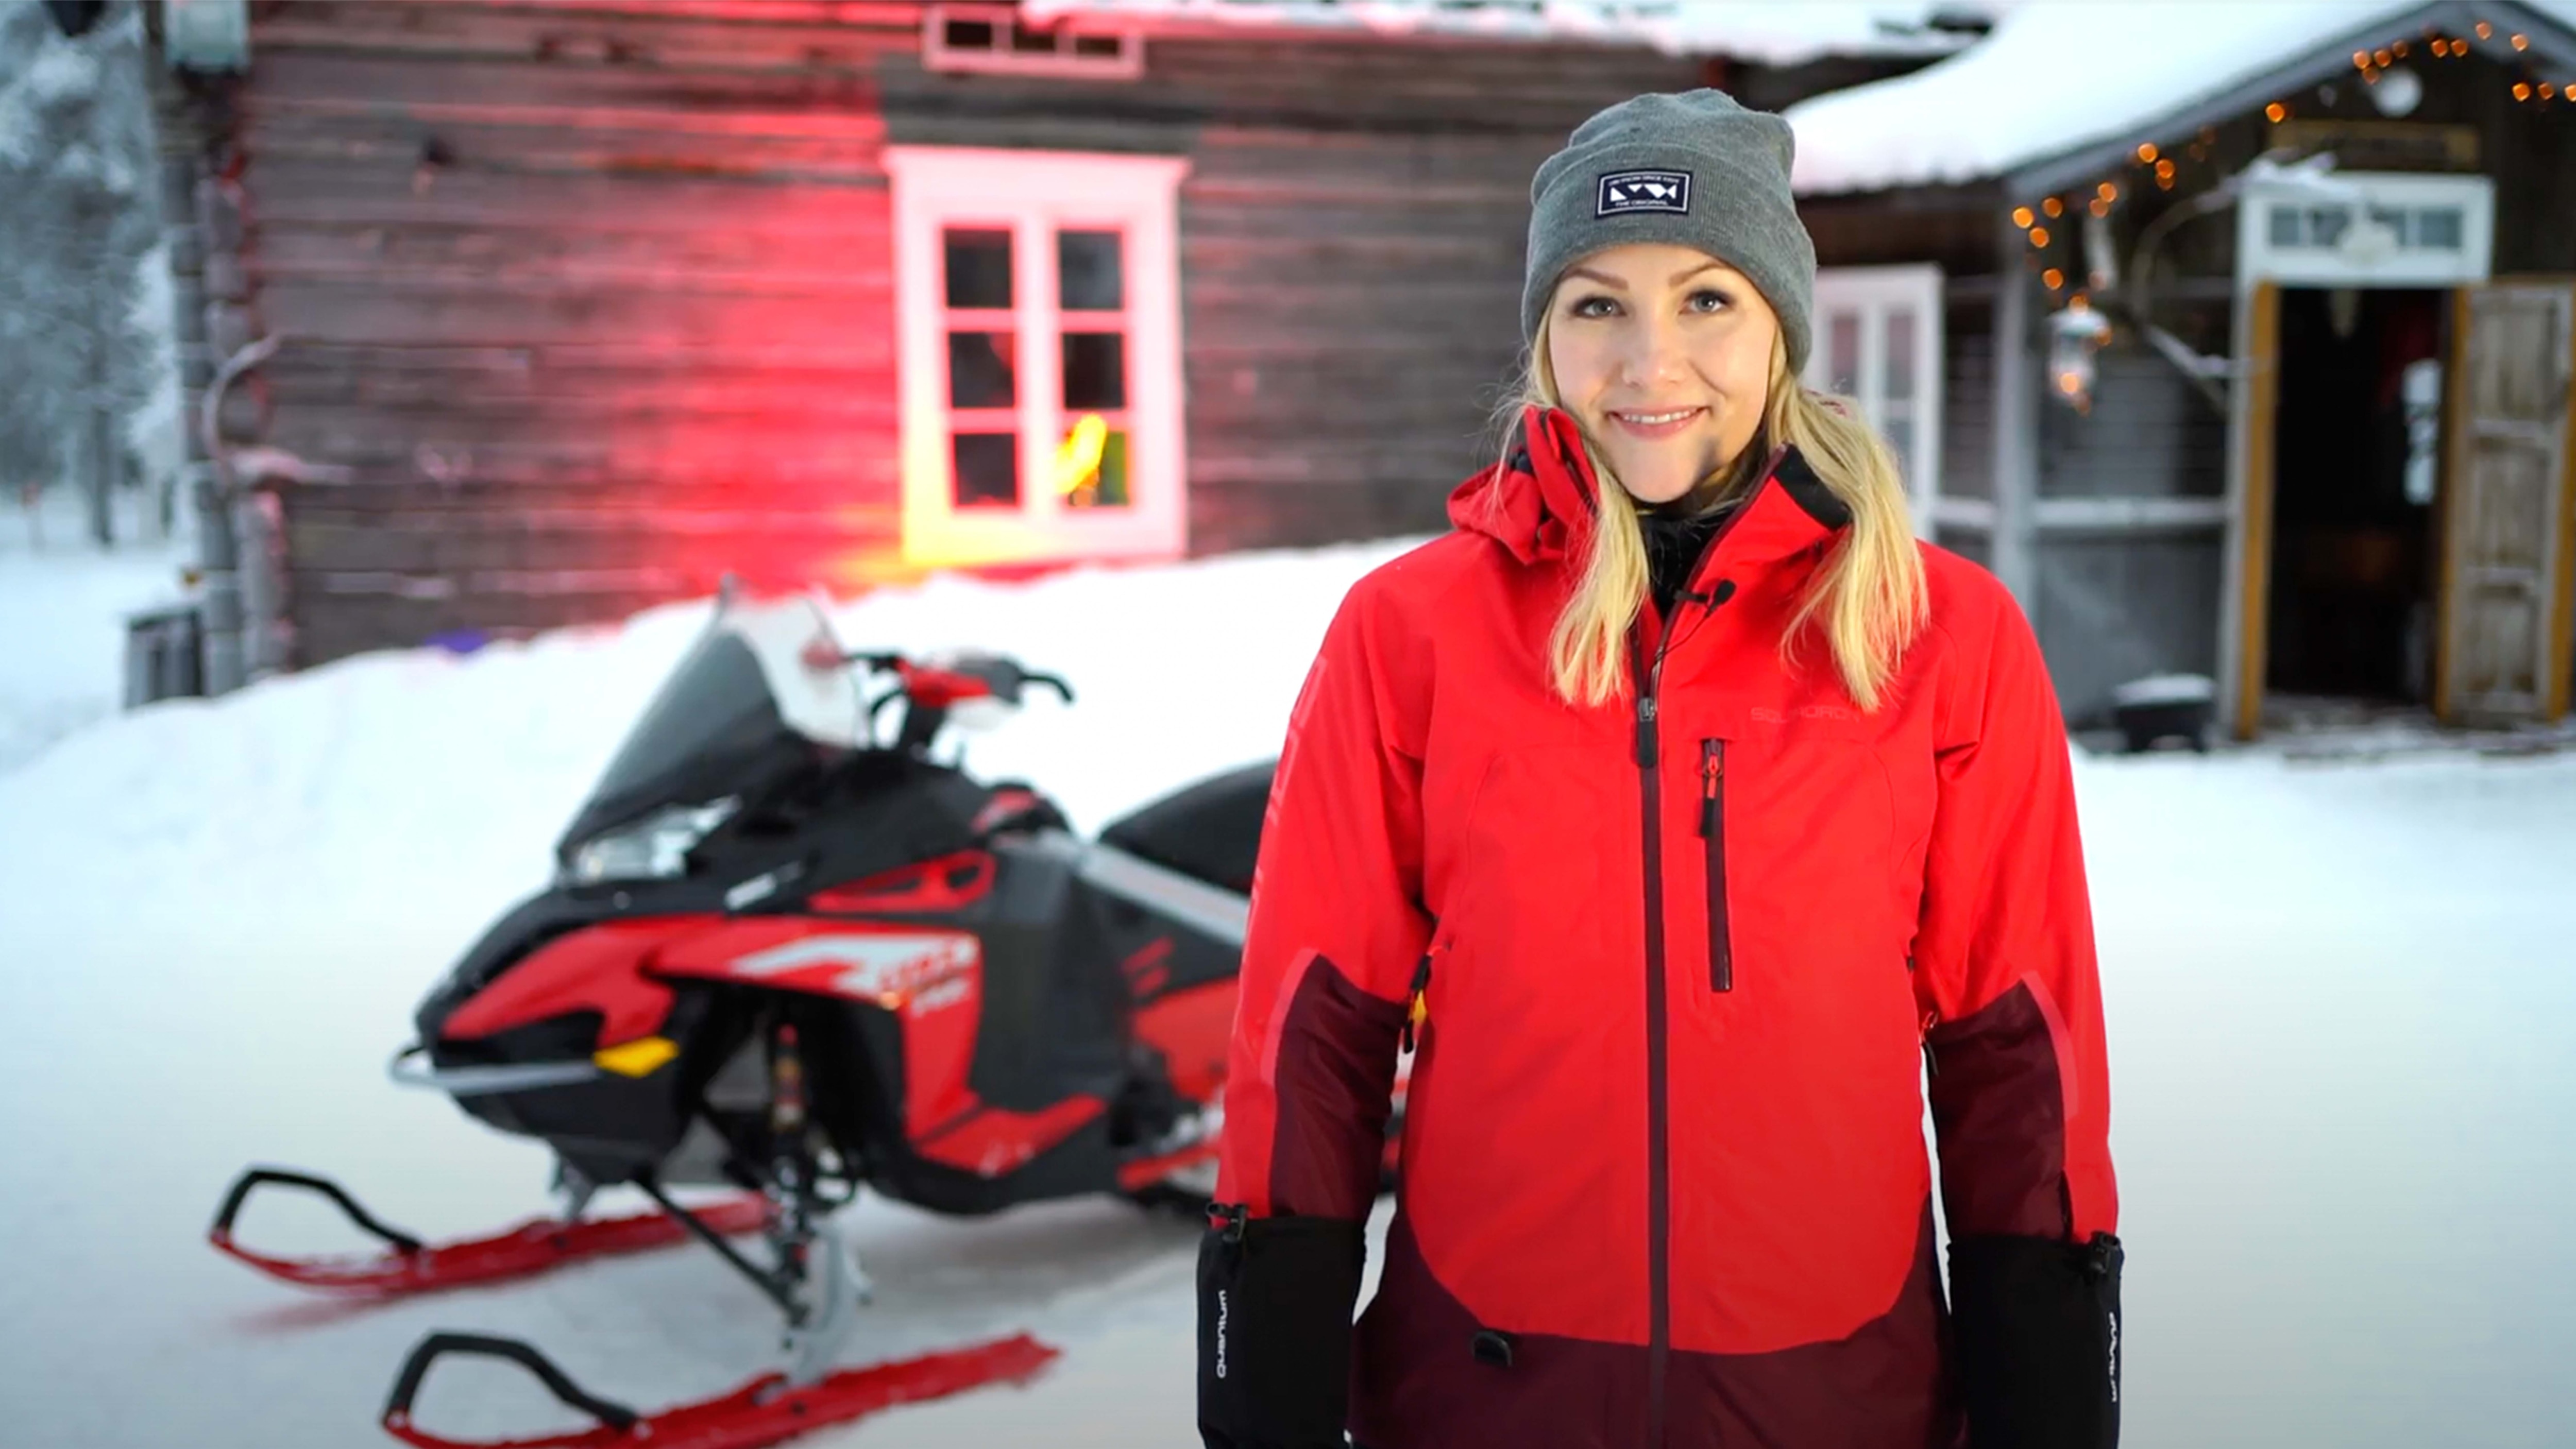 YouTube video - How to gear up for trail riding on a snowmobile